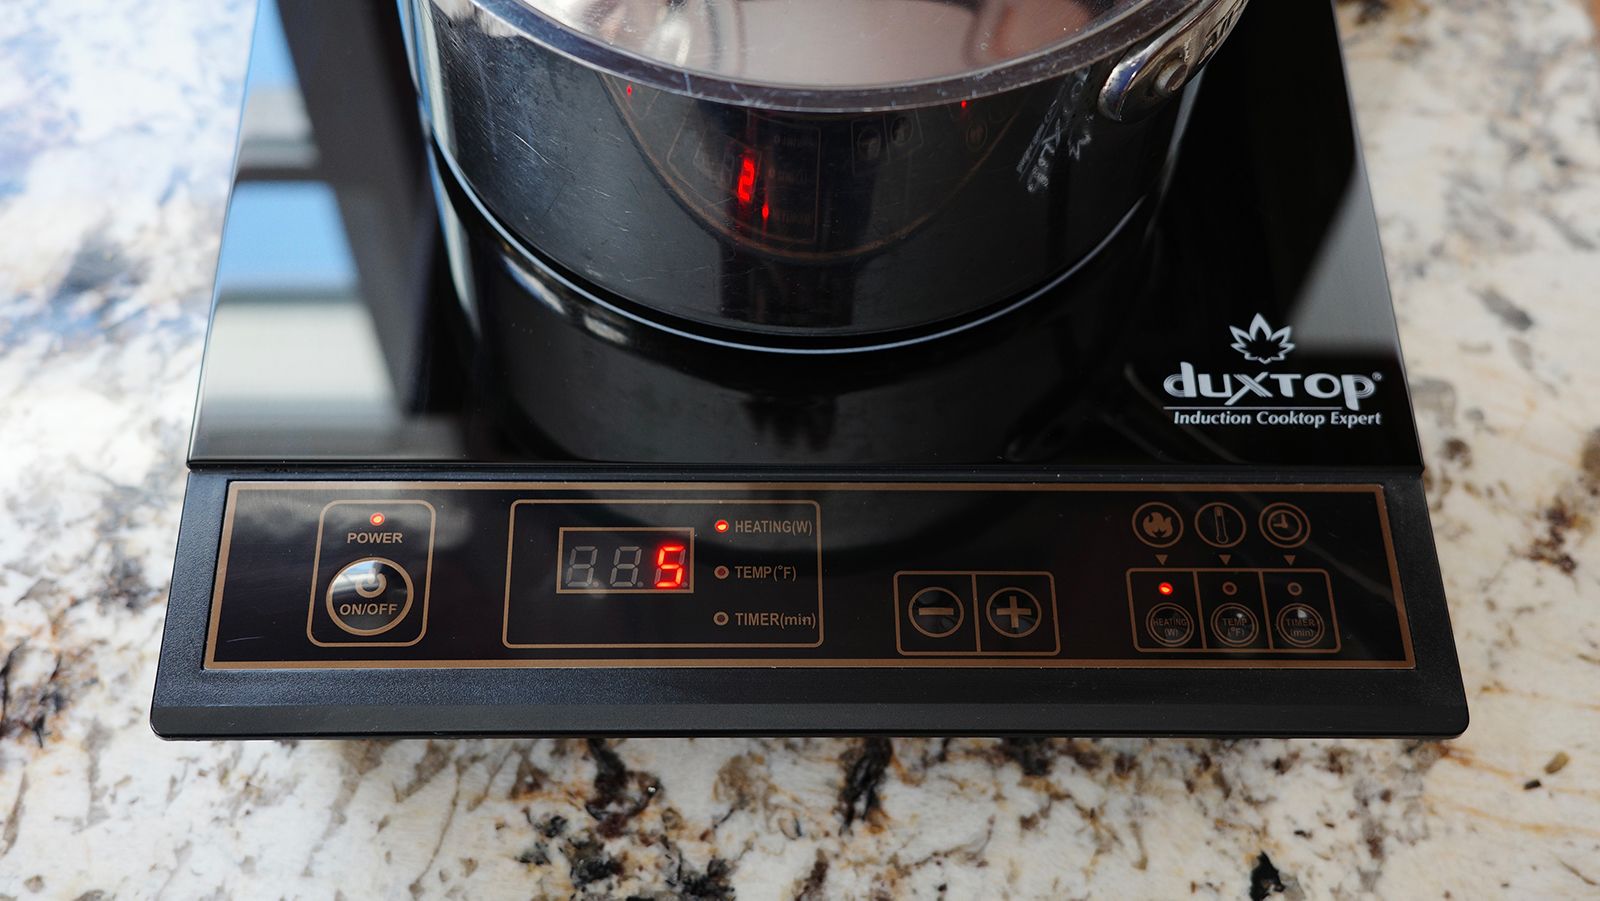 Portable Induction Cooktop Reviews (And How to Choose the Best One)